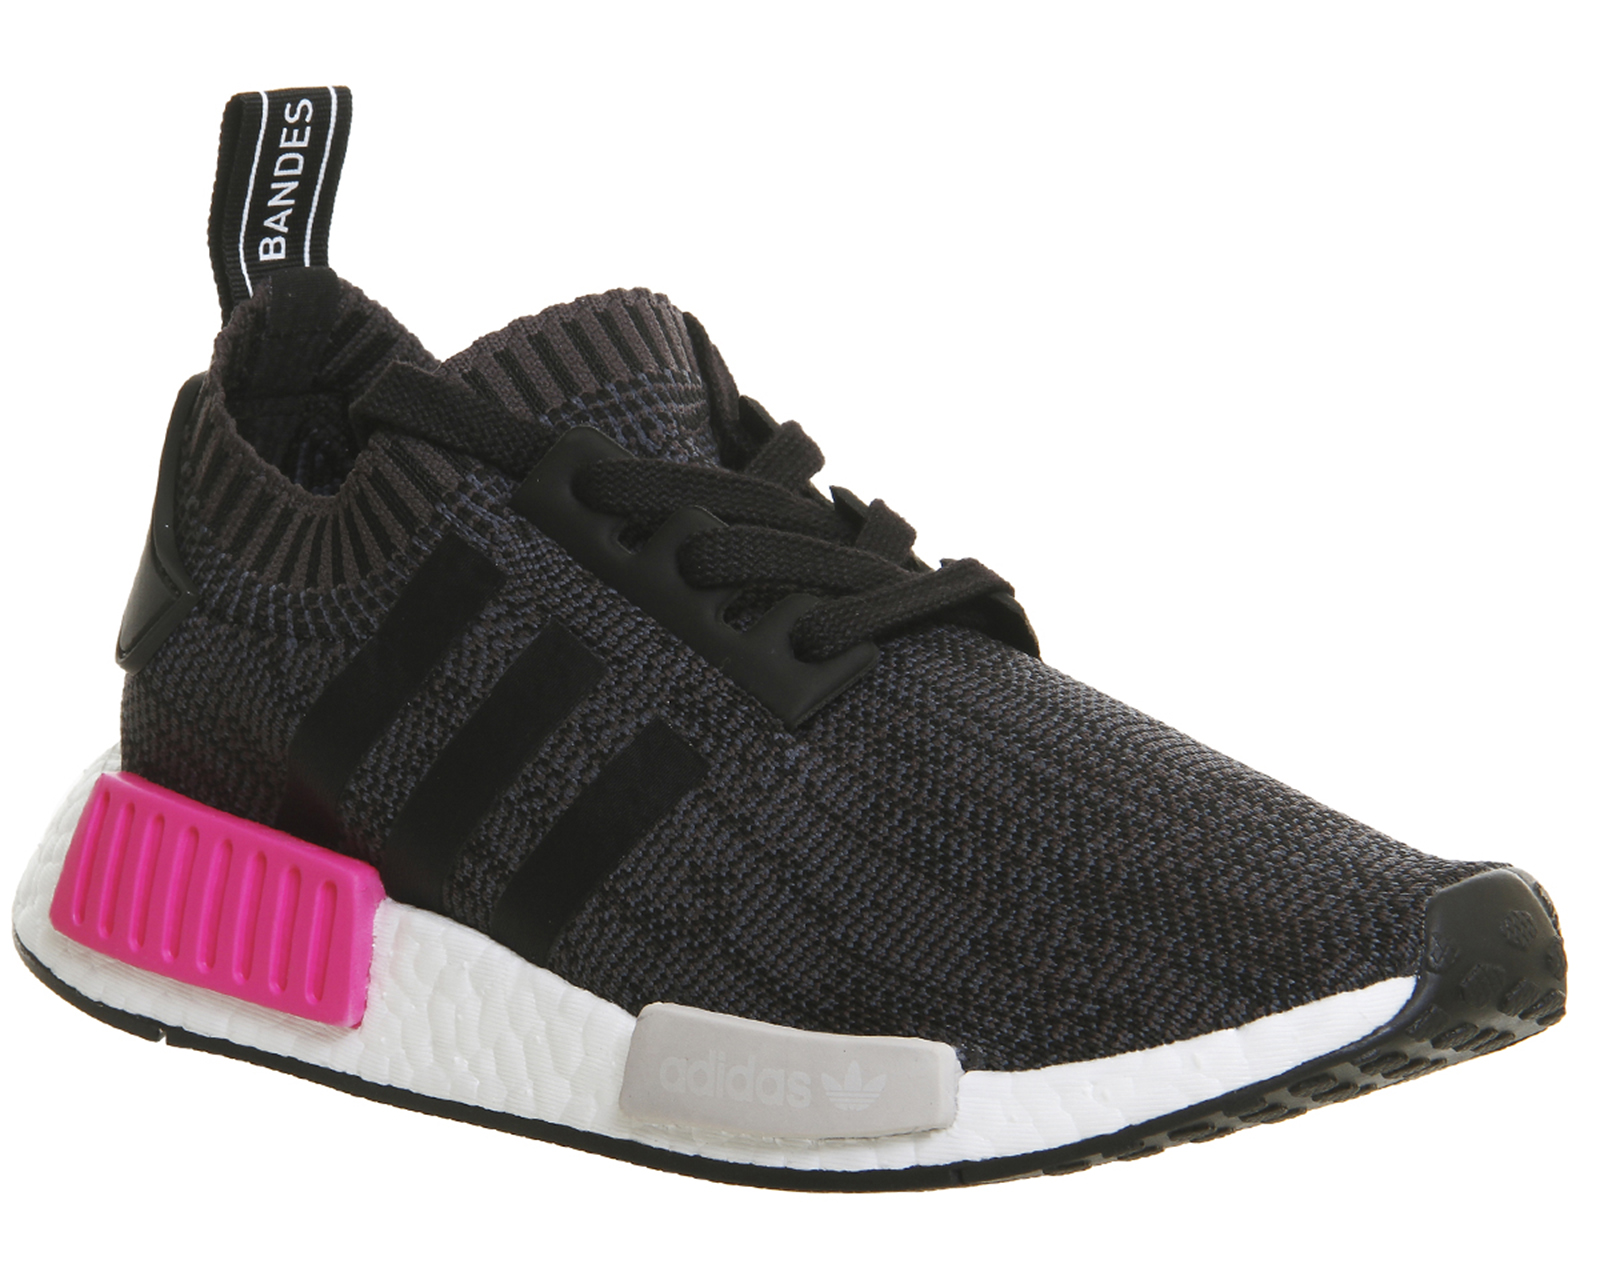 adidas Nmd R1 Prime Knit Black Shock Pink - Hers trainers